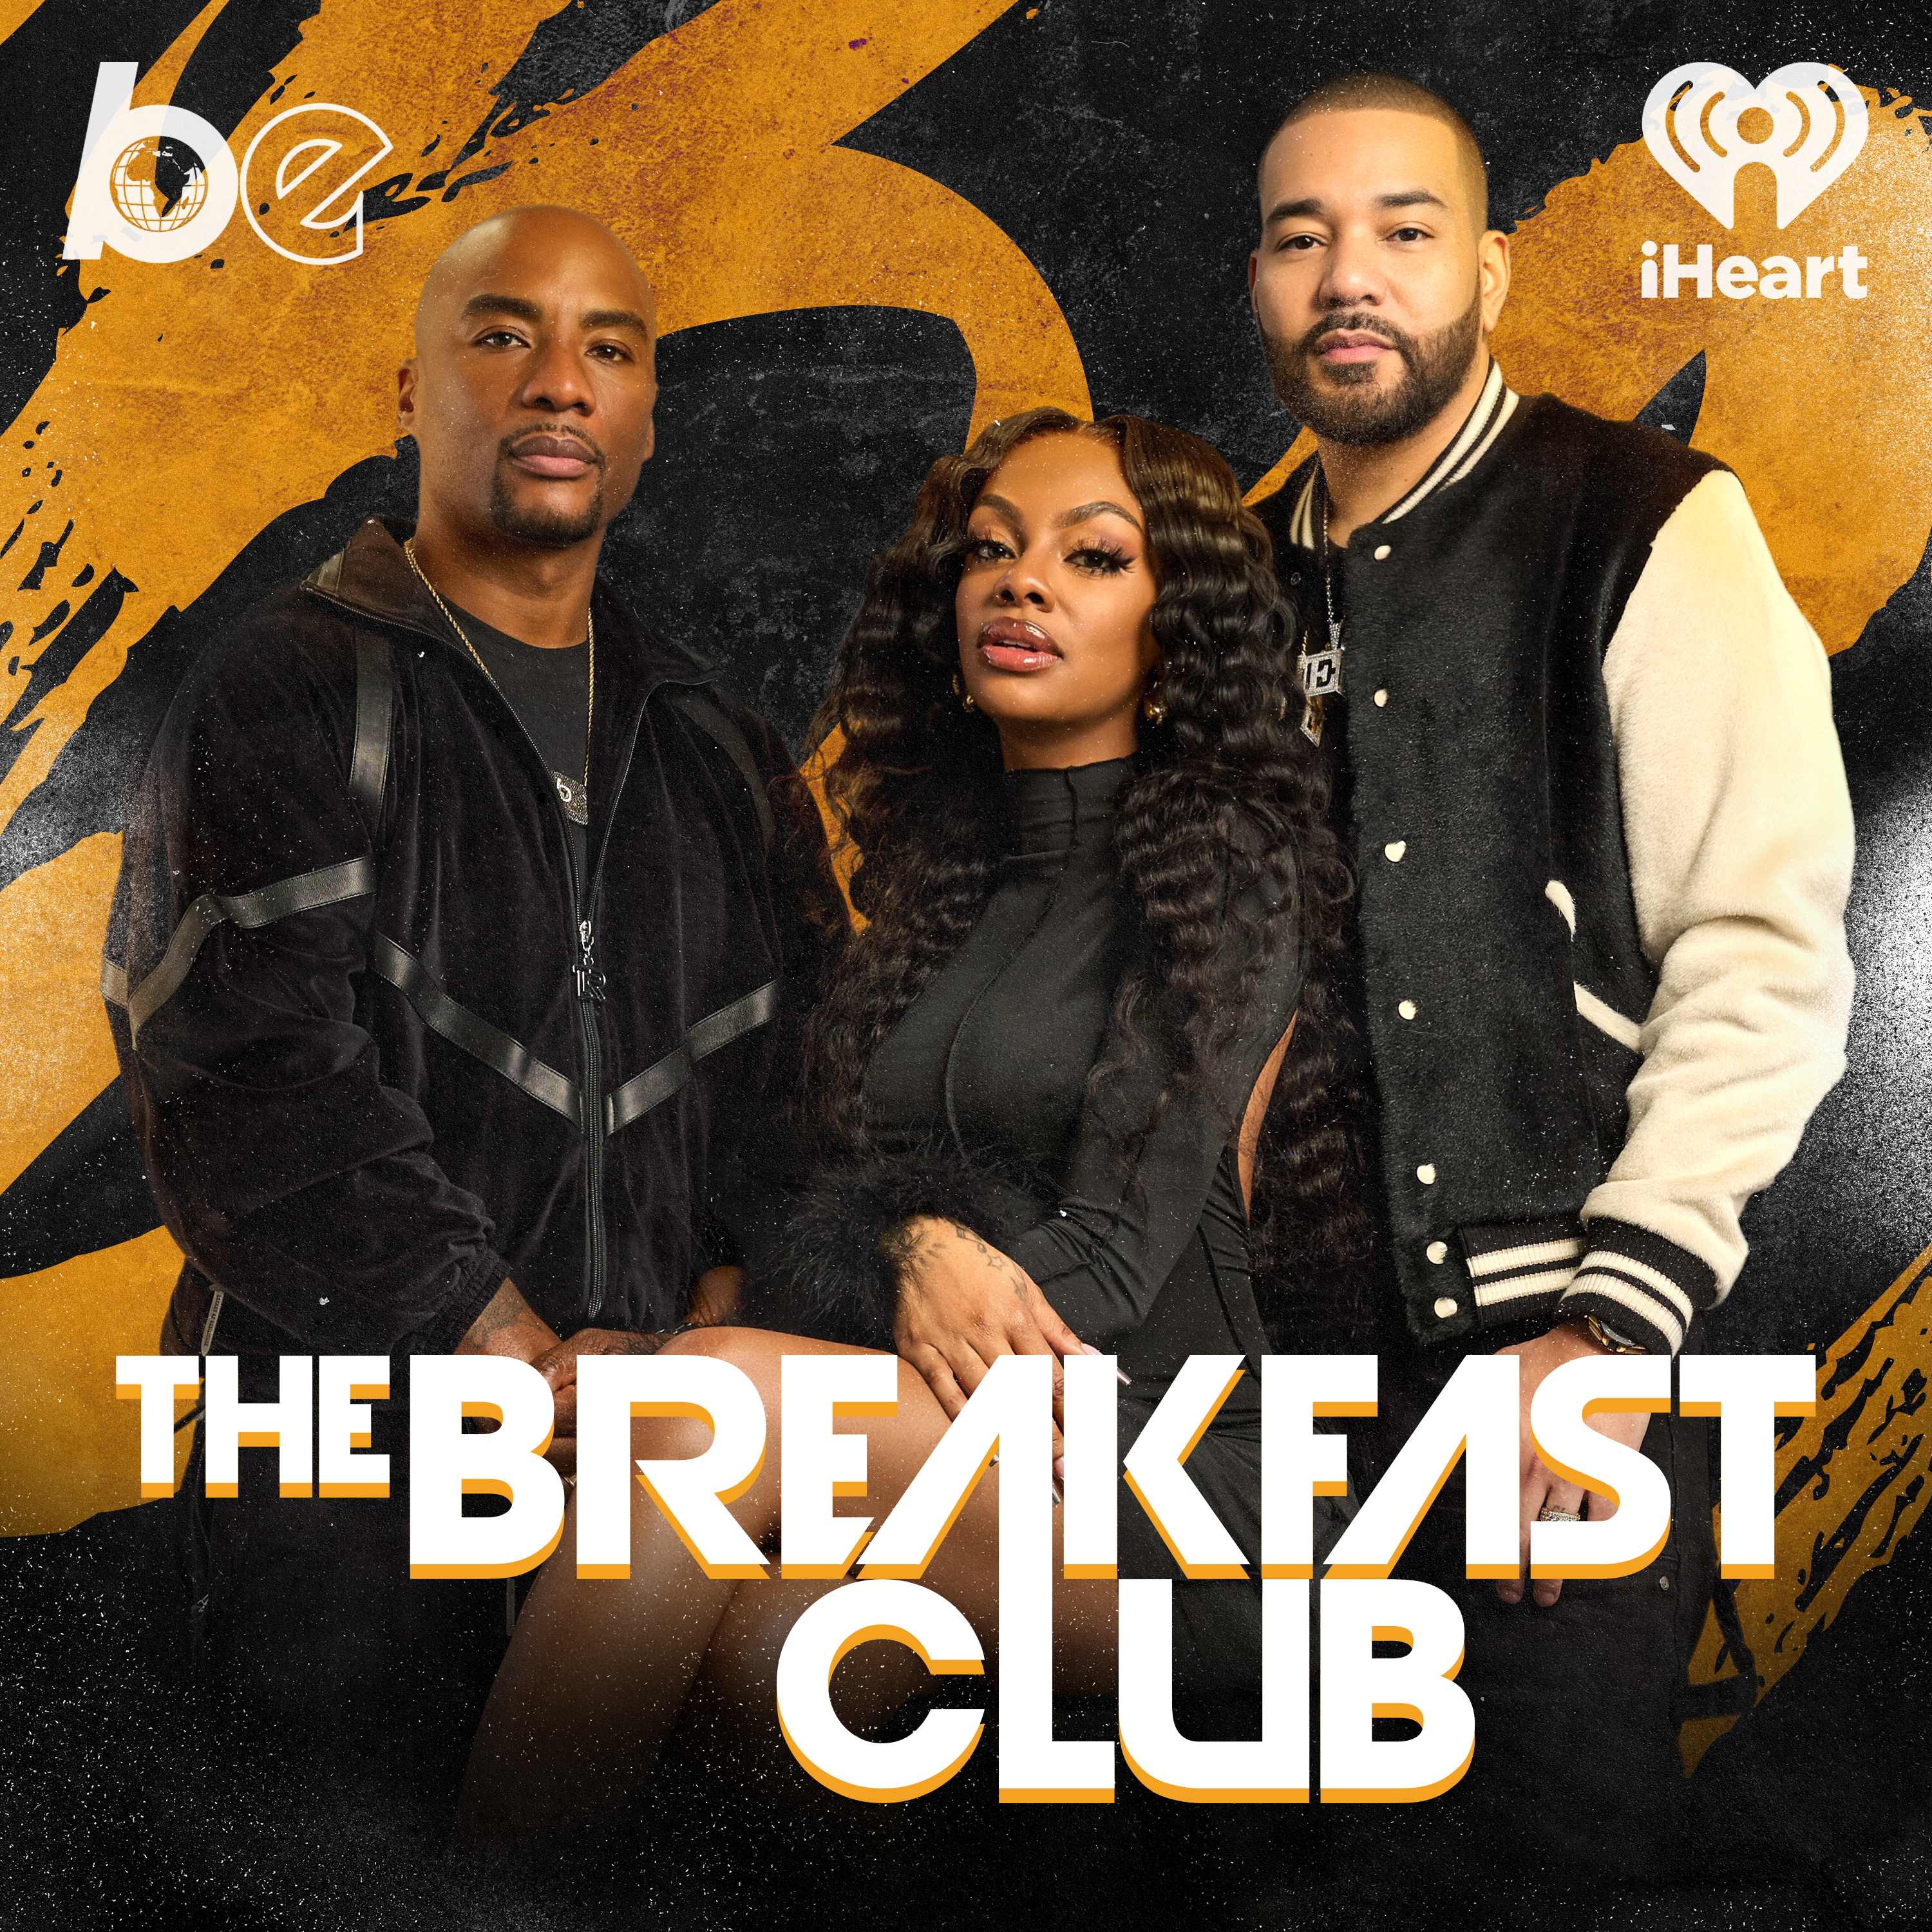 FULL SHOW: Mo'Nique Calls Out The Breakfast Club, Oprah, DL Hughley + More In New Interview, G.Herbo Tears Up On Friends Passing, Logic Opens Up On Family, Mo'Nique Blasts Tiffany Haddish, Talks Relationship With Kevin Hart + More